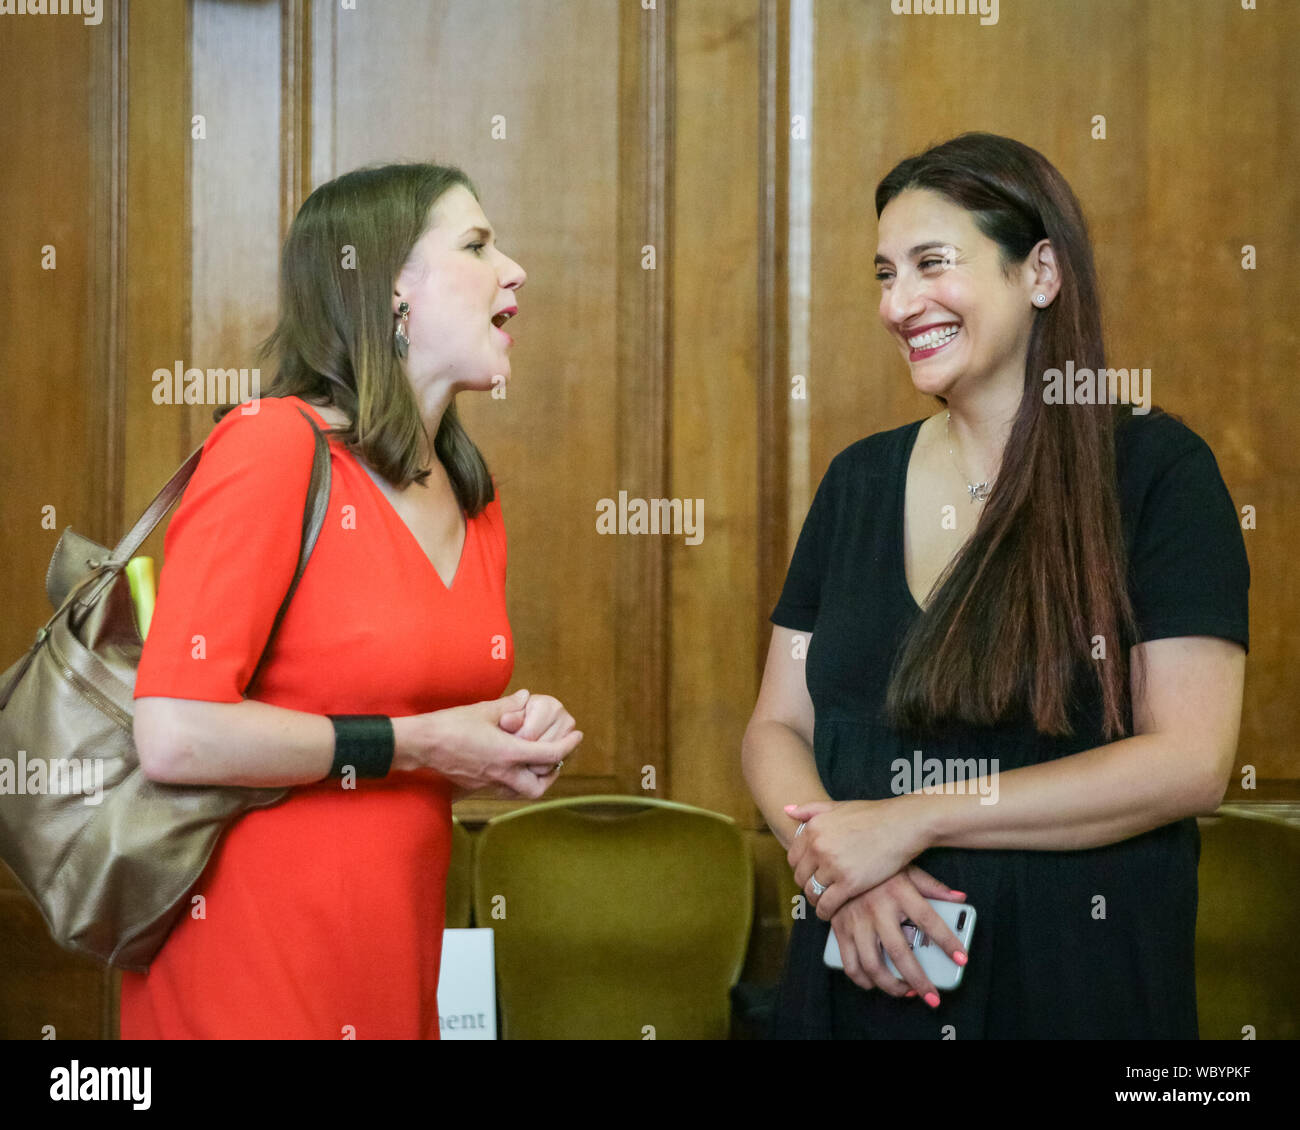 London, UK. 27th Aug, 2019. Lib Dem leader Jo Swinson chats to Luciana Berger, MP. Cross-party MPs and opposition party leaders assemble in the historic location of Church House in London to sign their 'Church House Declaration', with the intend to stop Parliament from being shut down by the government. Attendees include Lib Dem leader Jo Swinson, Labour Shadow Cabinet members John McDonnell and Sir Kier Starmer, the Green Party's Caroline Lucas, SNP's Ian Blackford and many others. Up to around 160 MPs are thought to have signed the declaration in total. Credit: Imageplotter/Alamy Live News Stock Photo